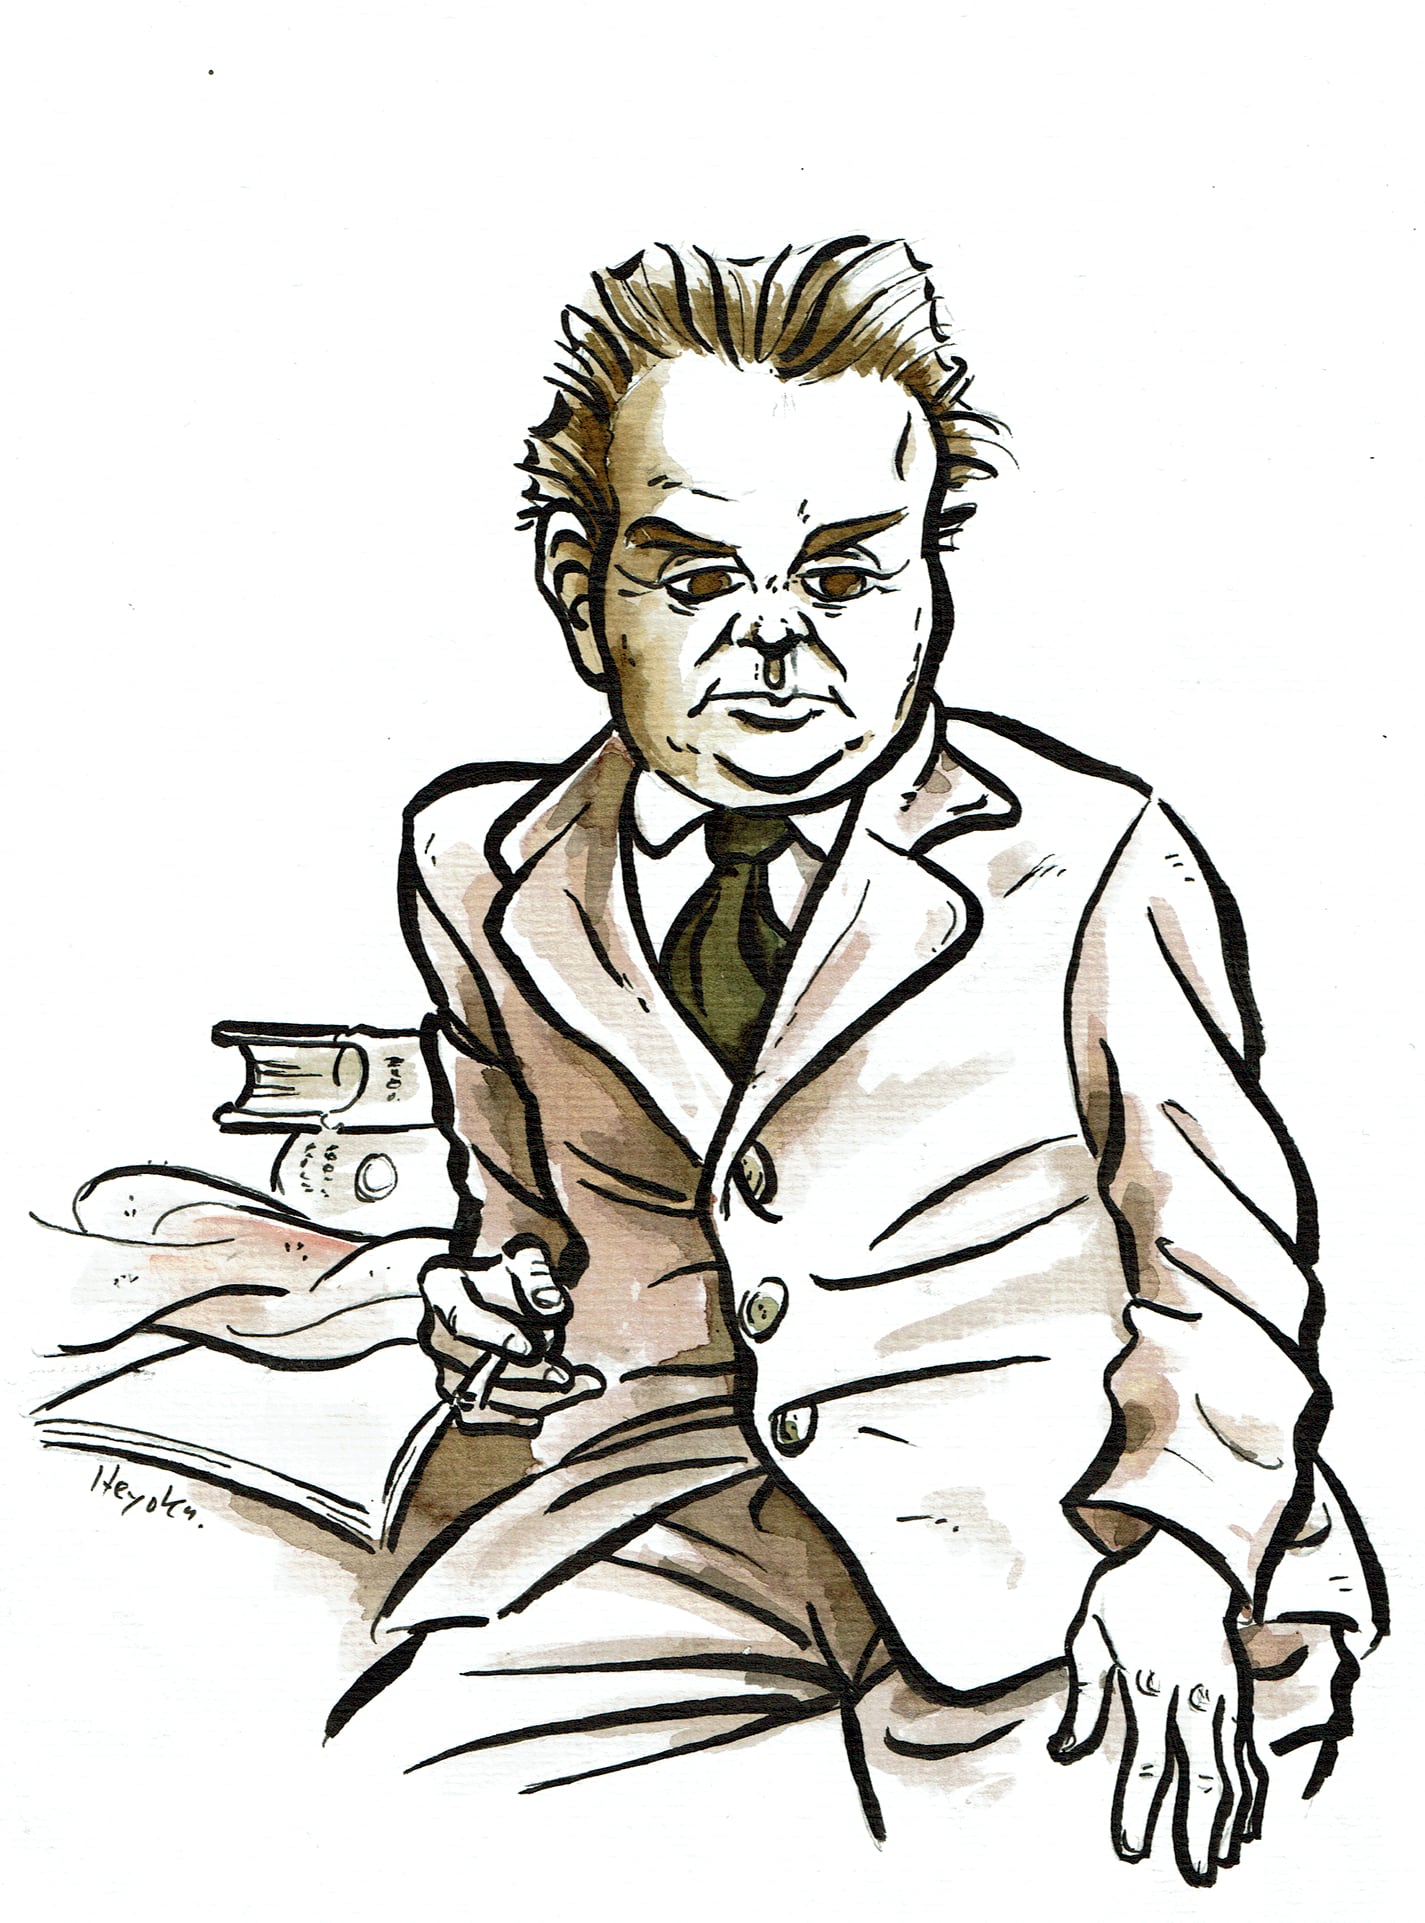 Drawing “Cyril Connolly”